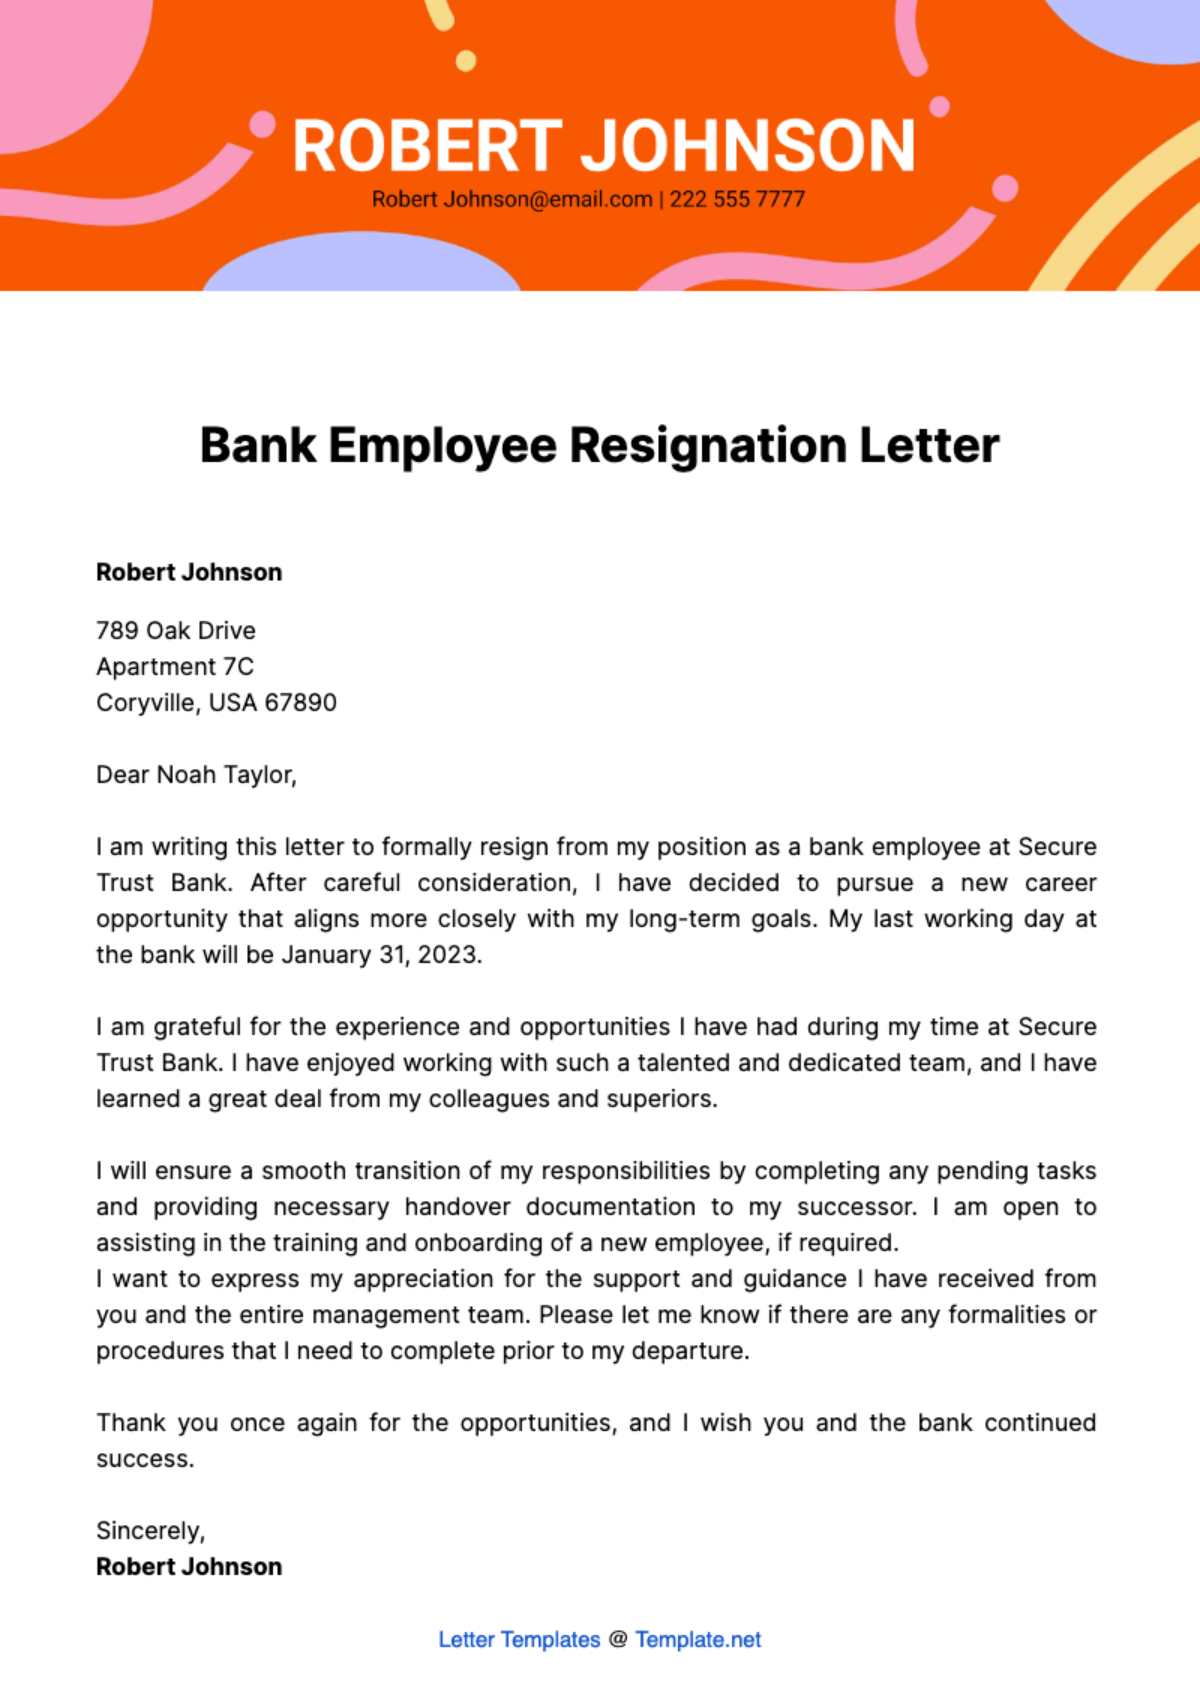 Free Bank Employee Resignation Letter Template